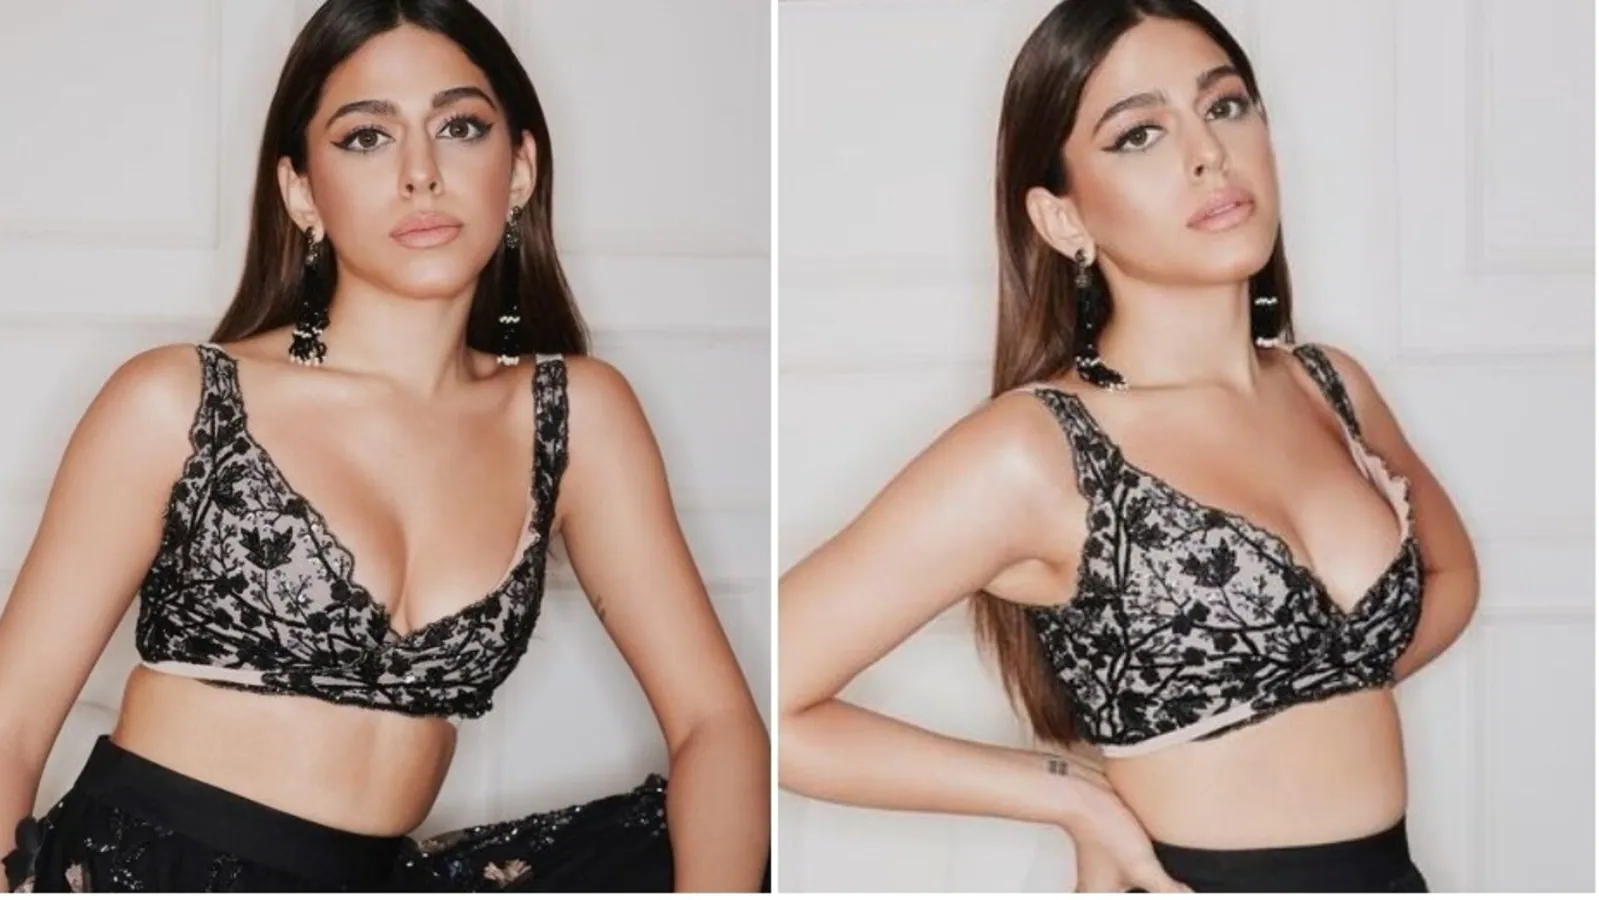 Alay F in ₹1 lakh black tie-up blouse and lehenga set looks bombshell for new photoshoot: See pics